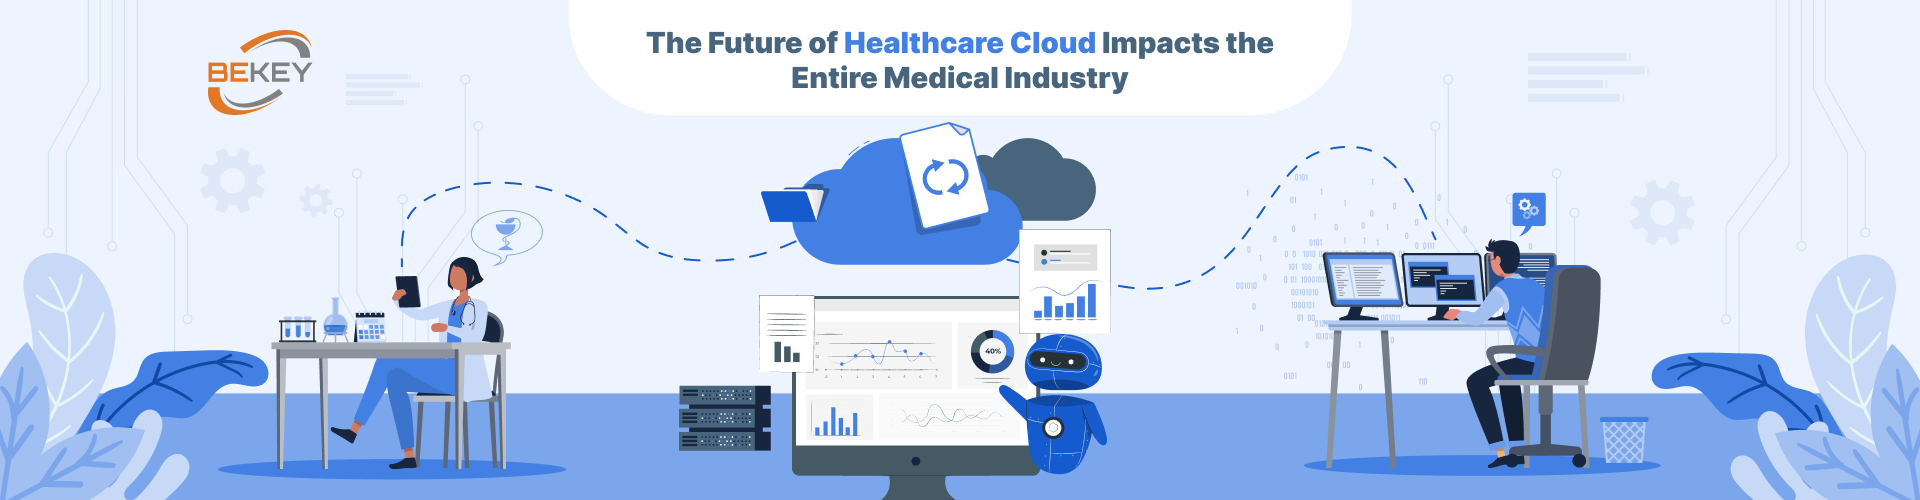 The Future of Healthcare Cloud Impacts the Entire Medical Industry - image